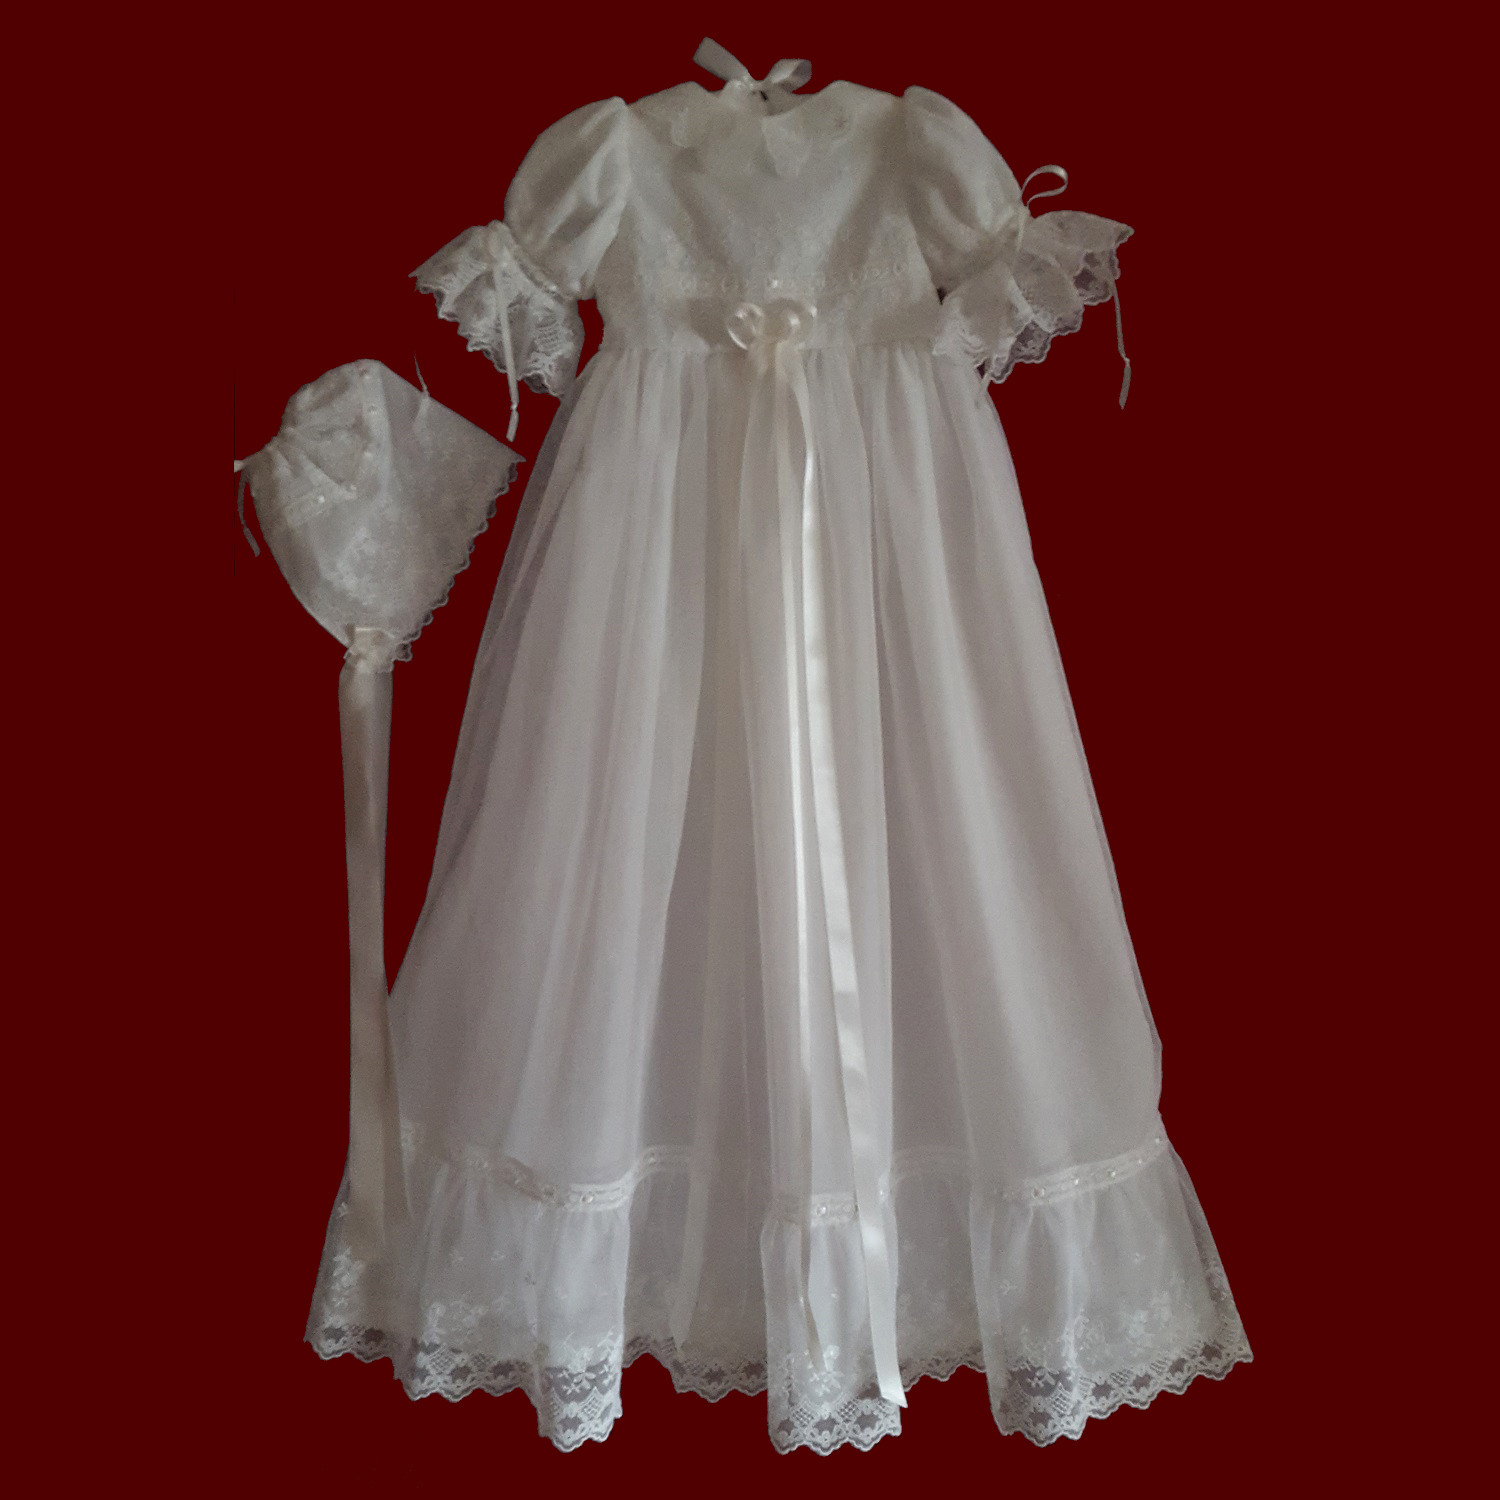 Embroidered English Netting Lace Christening Gown, Slip & Bonnet